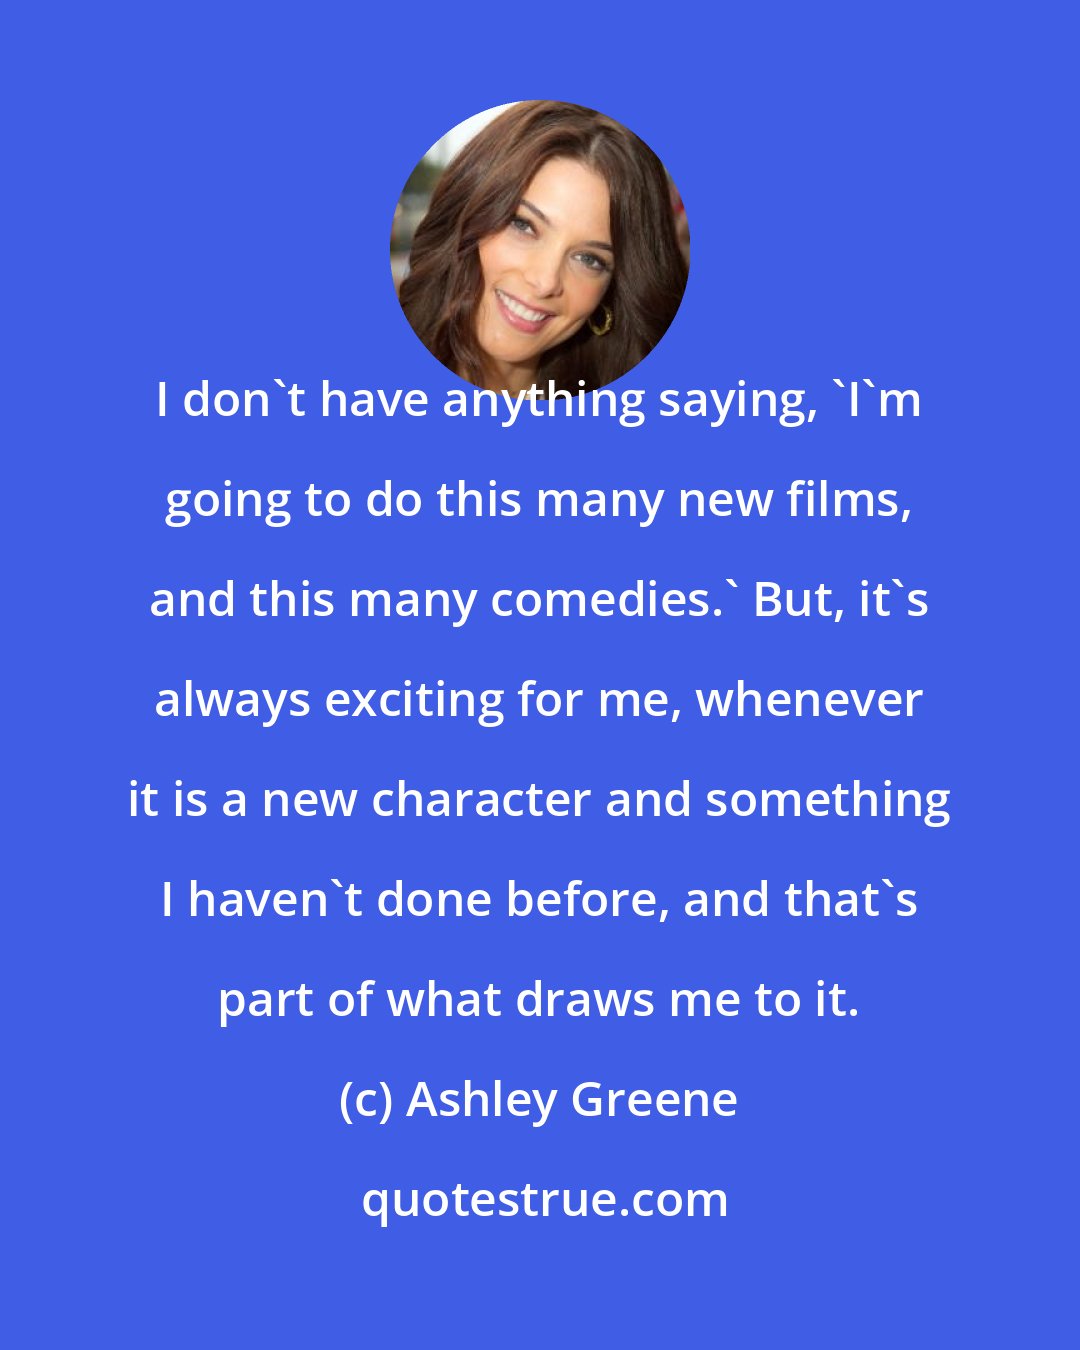 Ashley Greene: I don't have anything saying, 'I'm going to do this many new films, and this many comedies.' But, it's always exciting for me, whenever it is a new character and something I haven't done before, and that's part of what draws me to it.